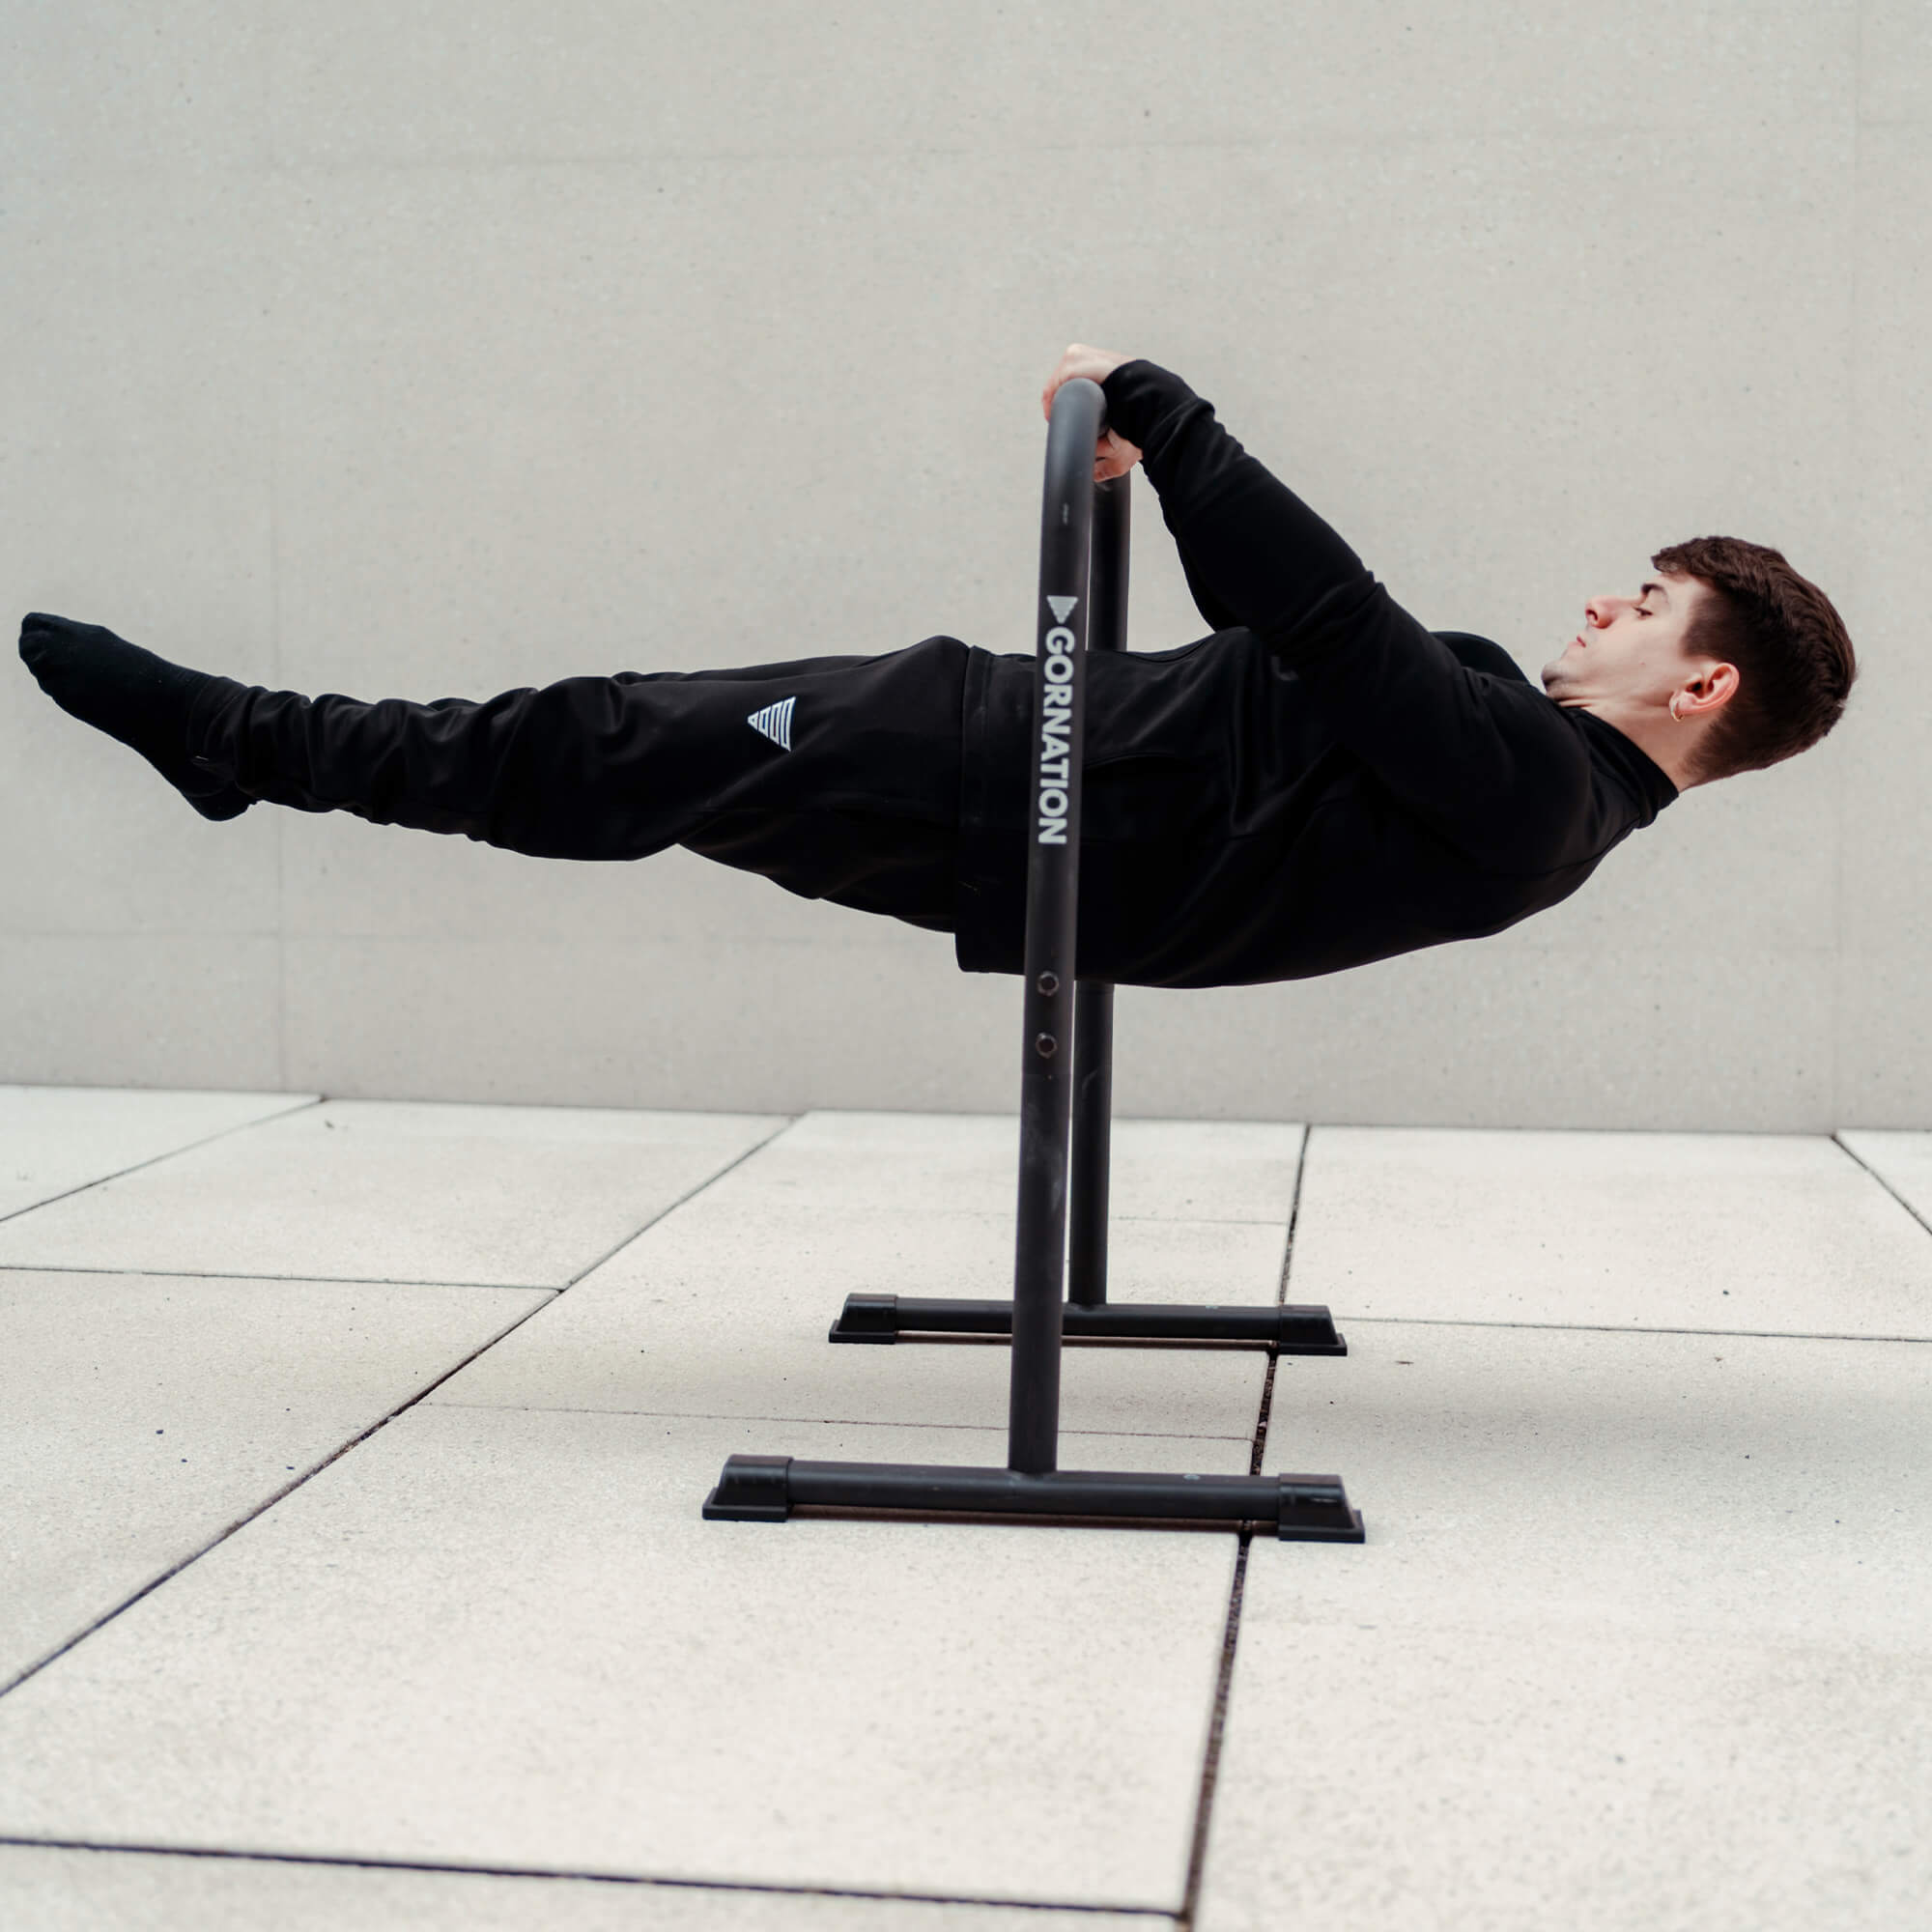 Exercise on dip bars high parallel bars front-lever